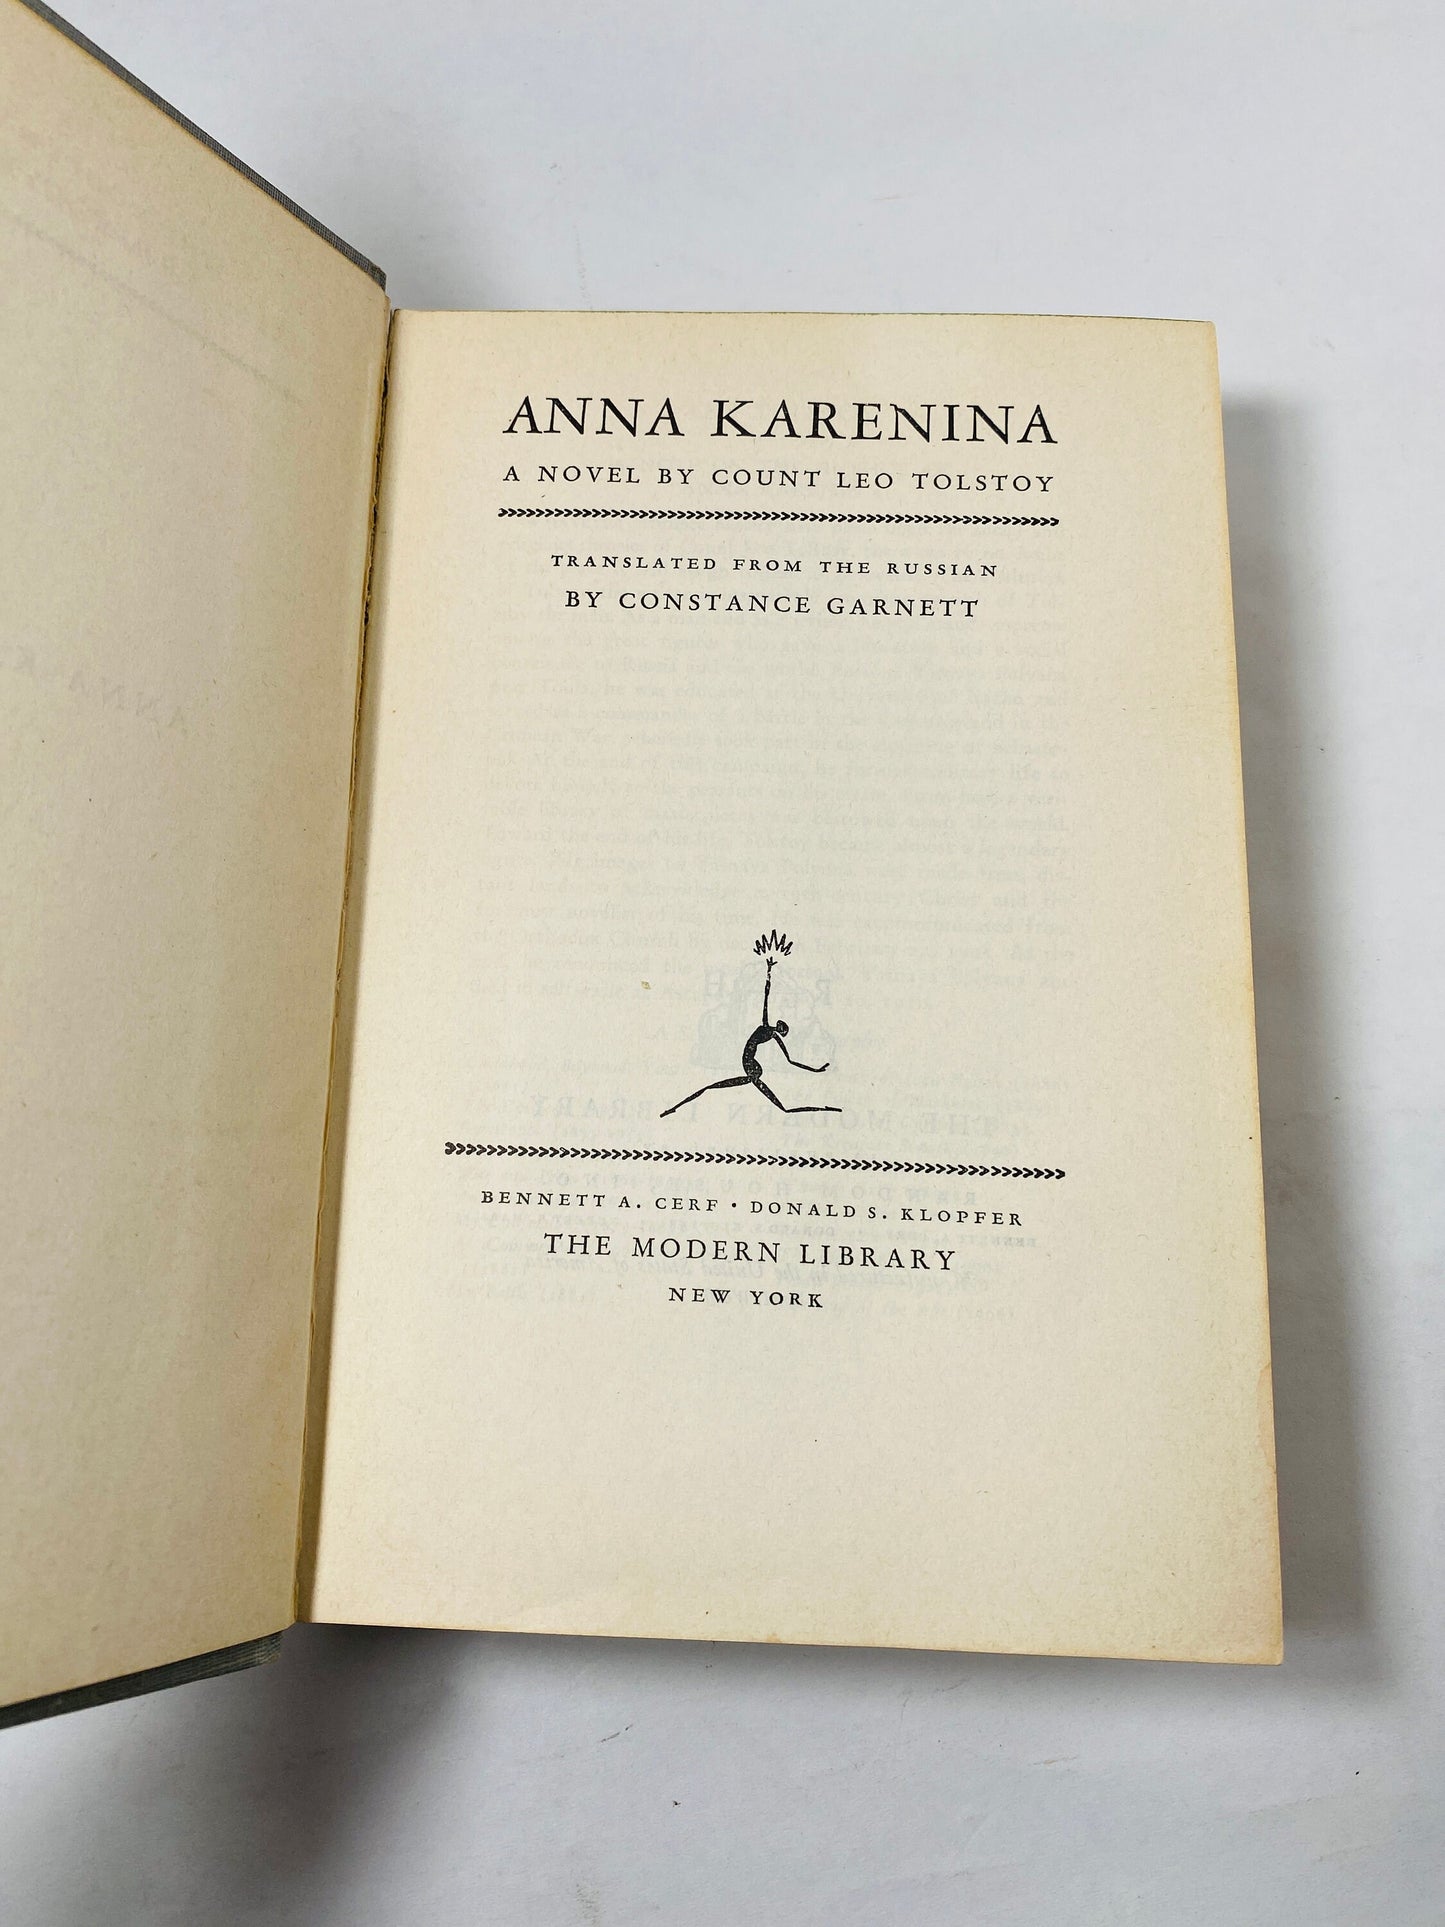 Anna Karenina vintage Modern Library book by Tolstoy circa 1931 Classic Russian aristocrat Literature romance love story of an affair